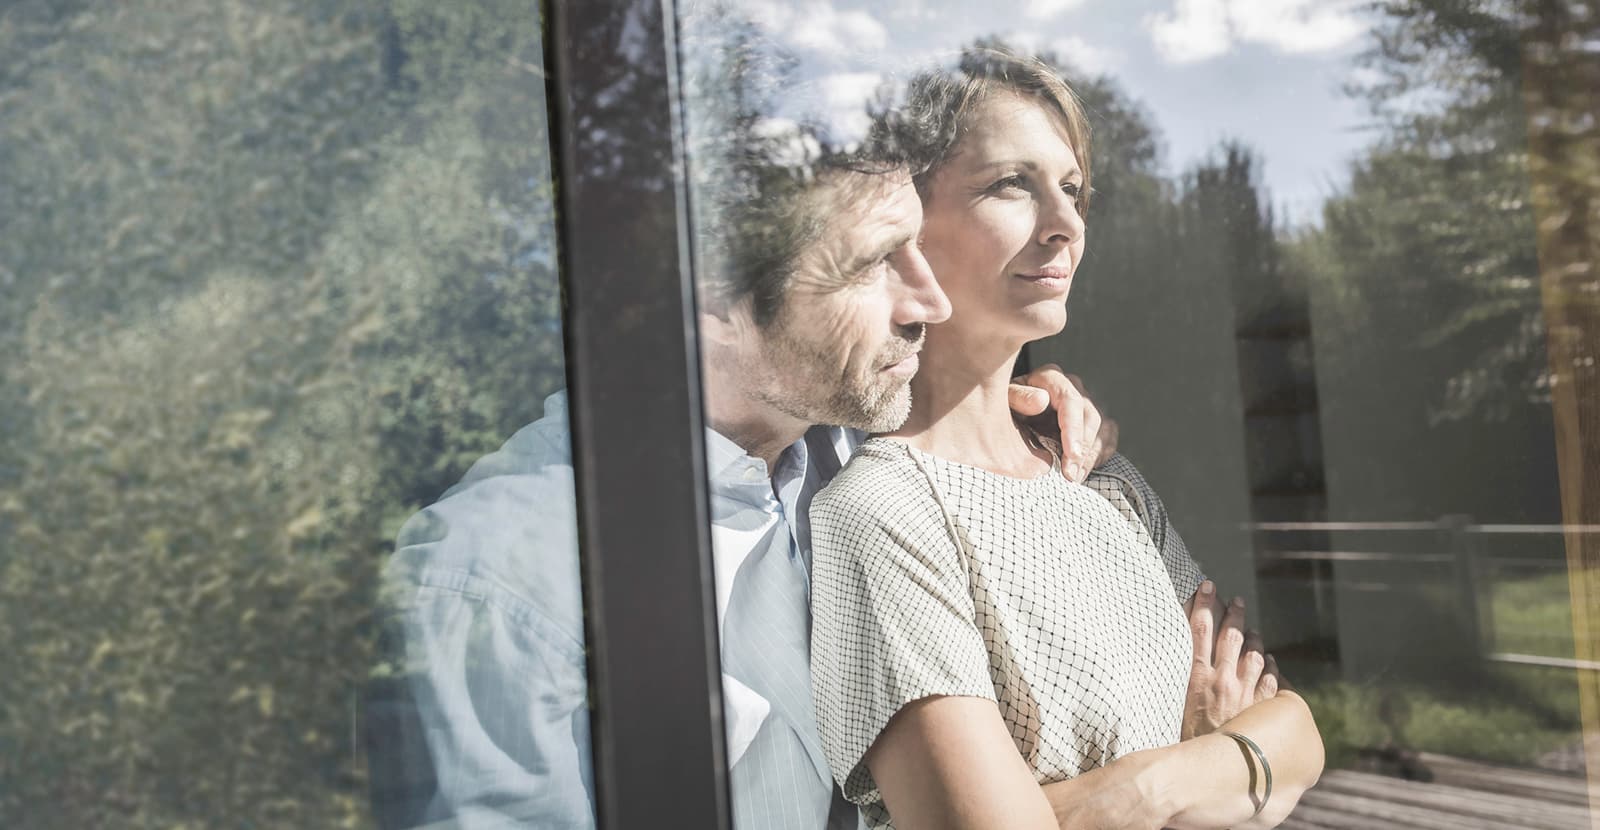 A couple standing inside a glass-fronted building looking out at nature